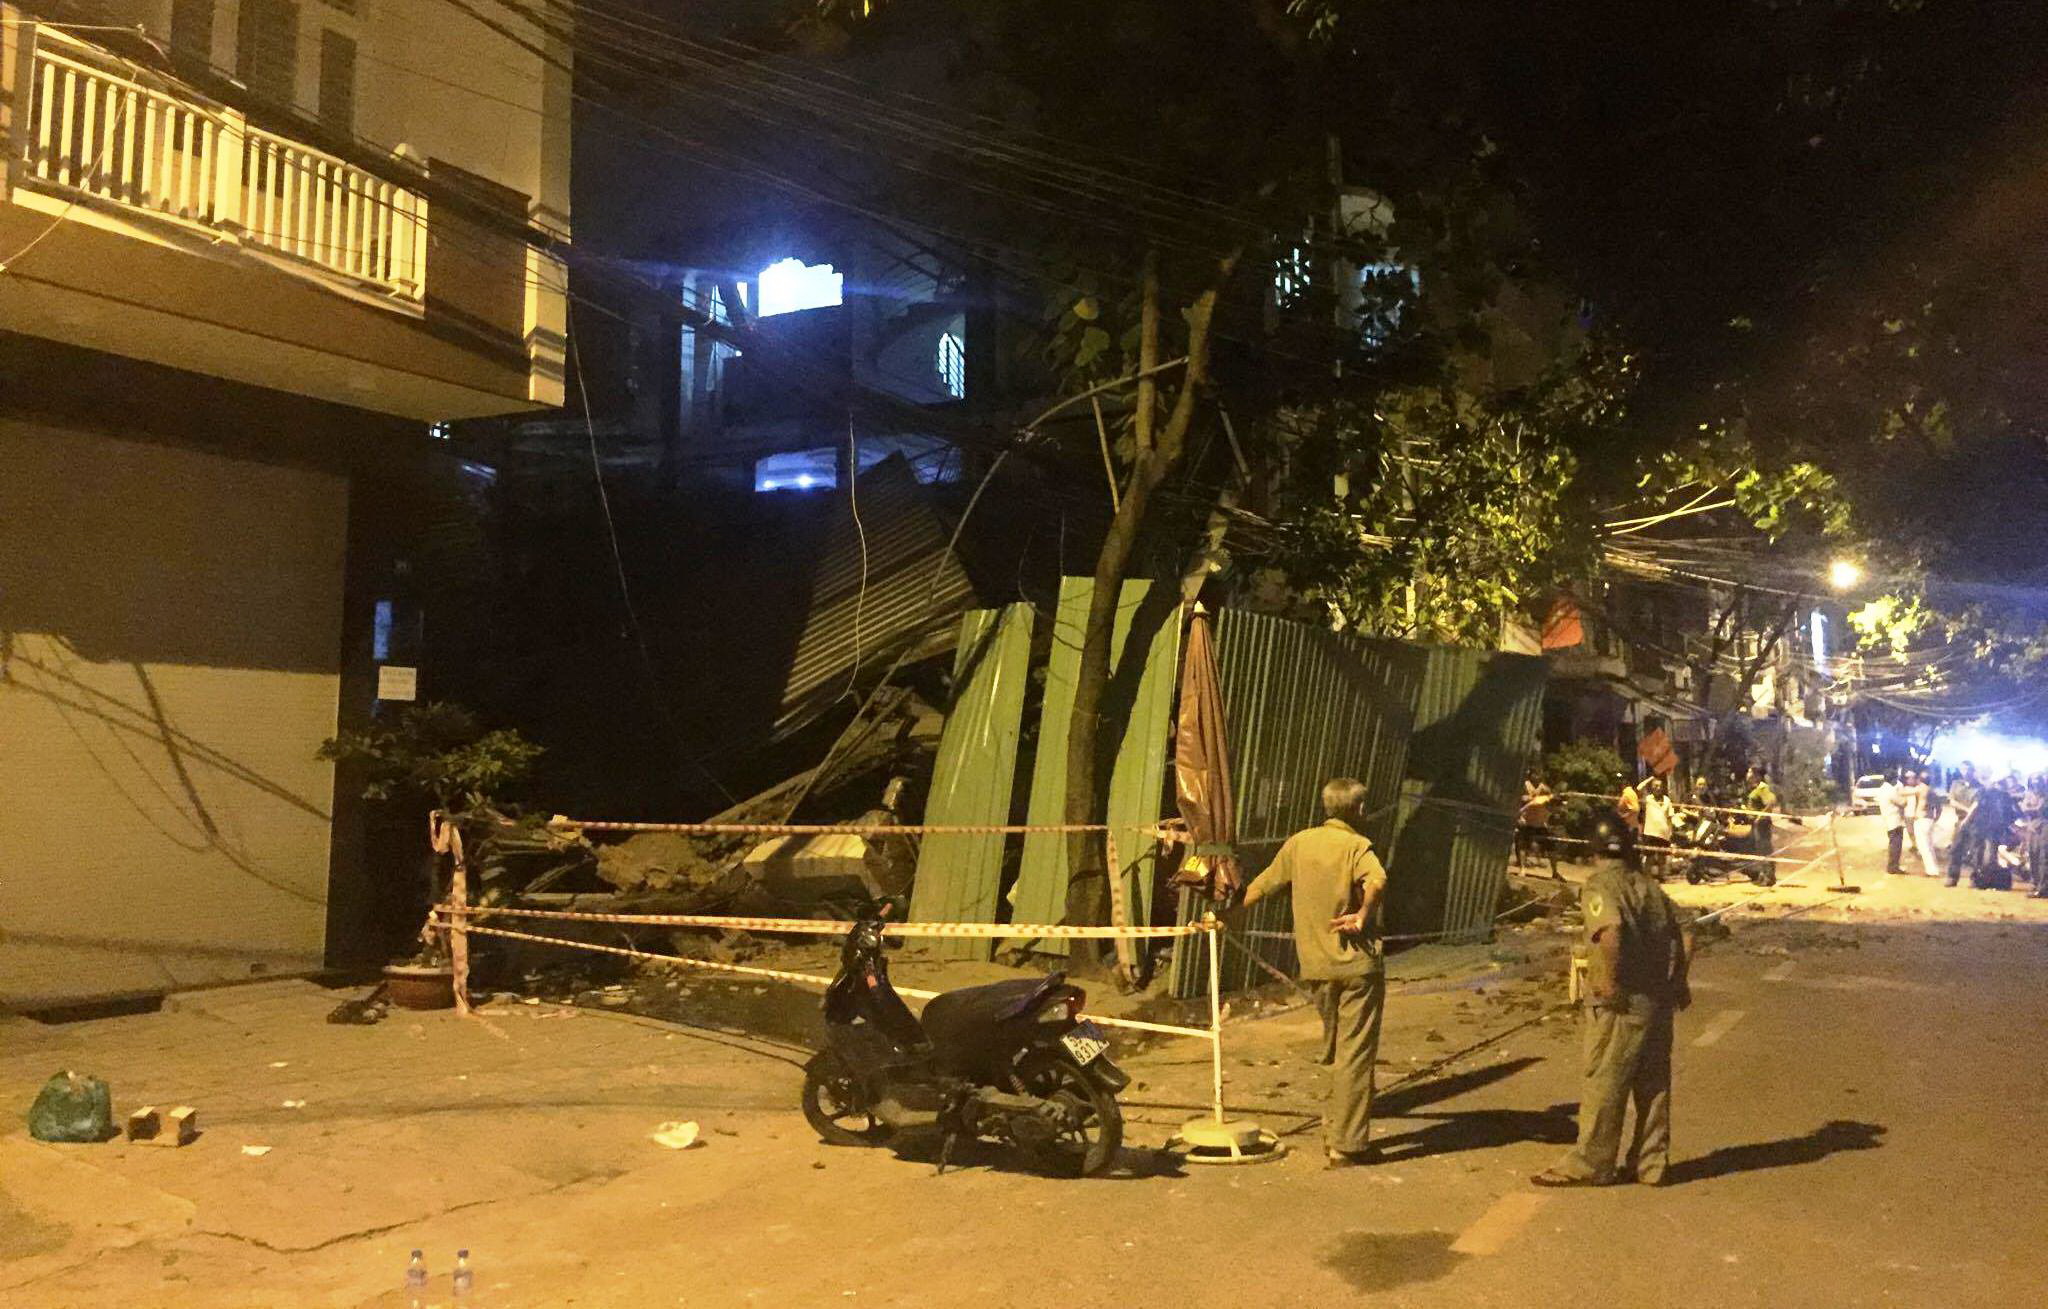 The site of the house collapse on Tan Son Hoa Street in Tan Binh District, Ho Chi Minh City. Photo: Tuoi Tre